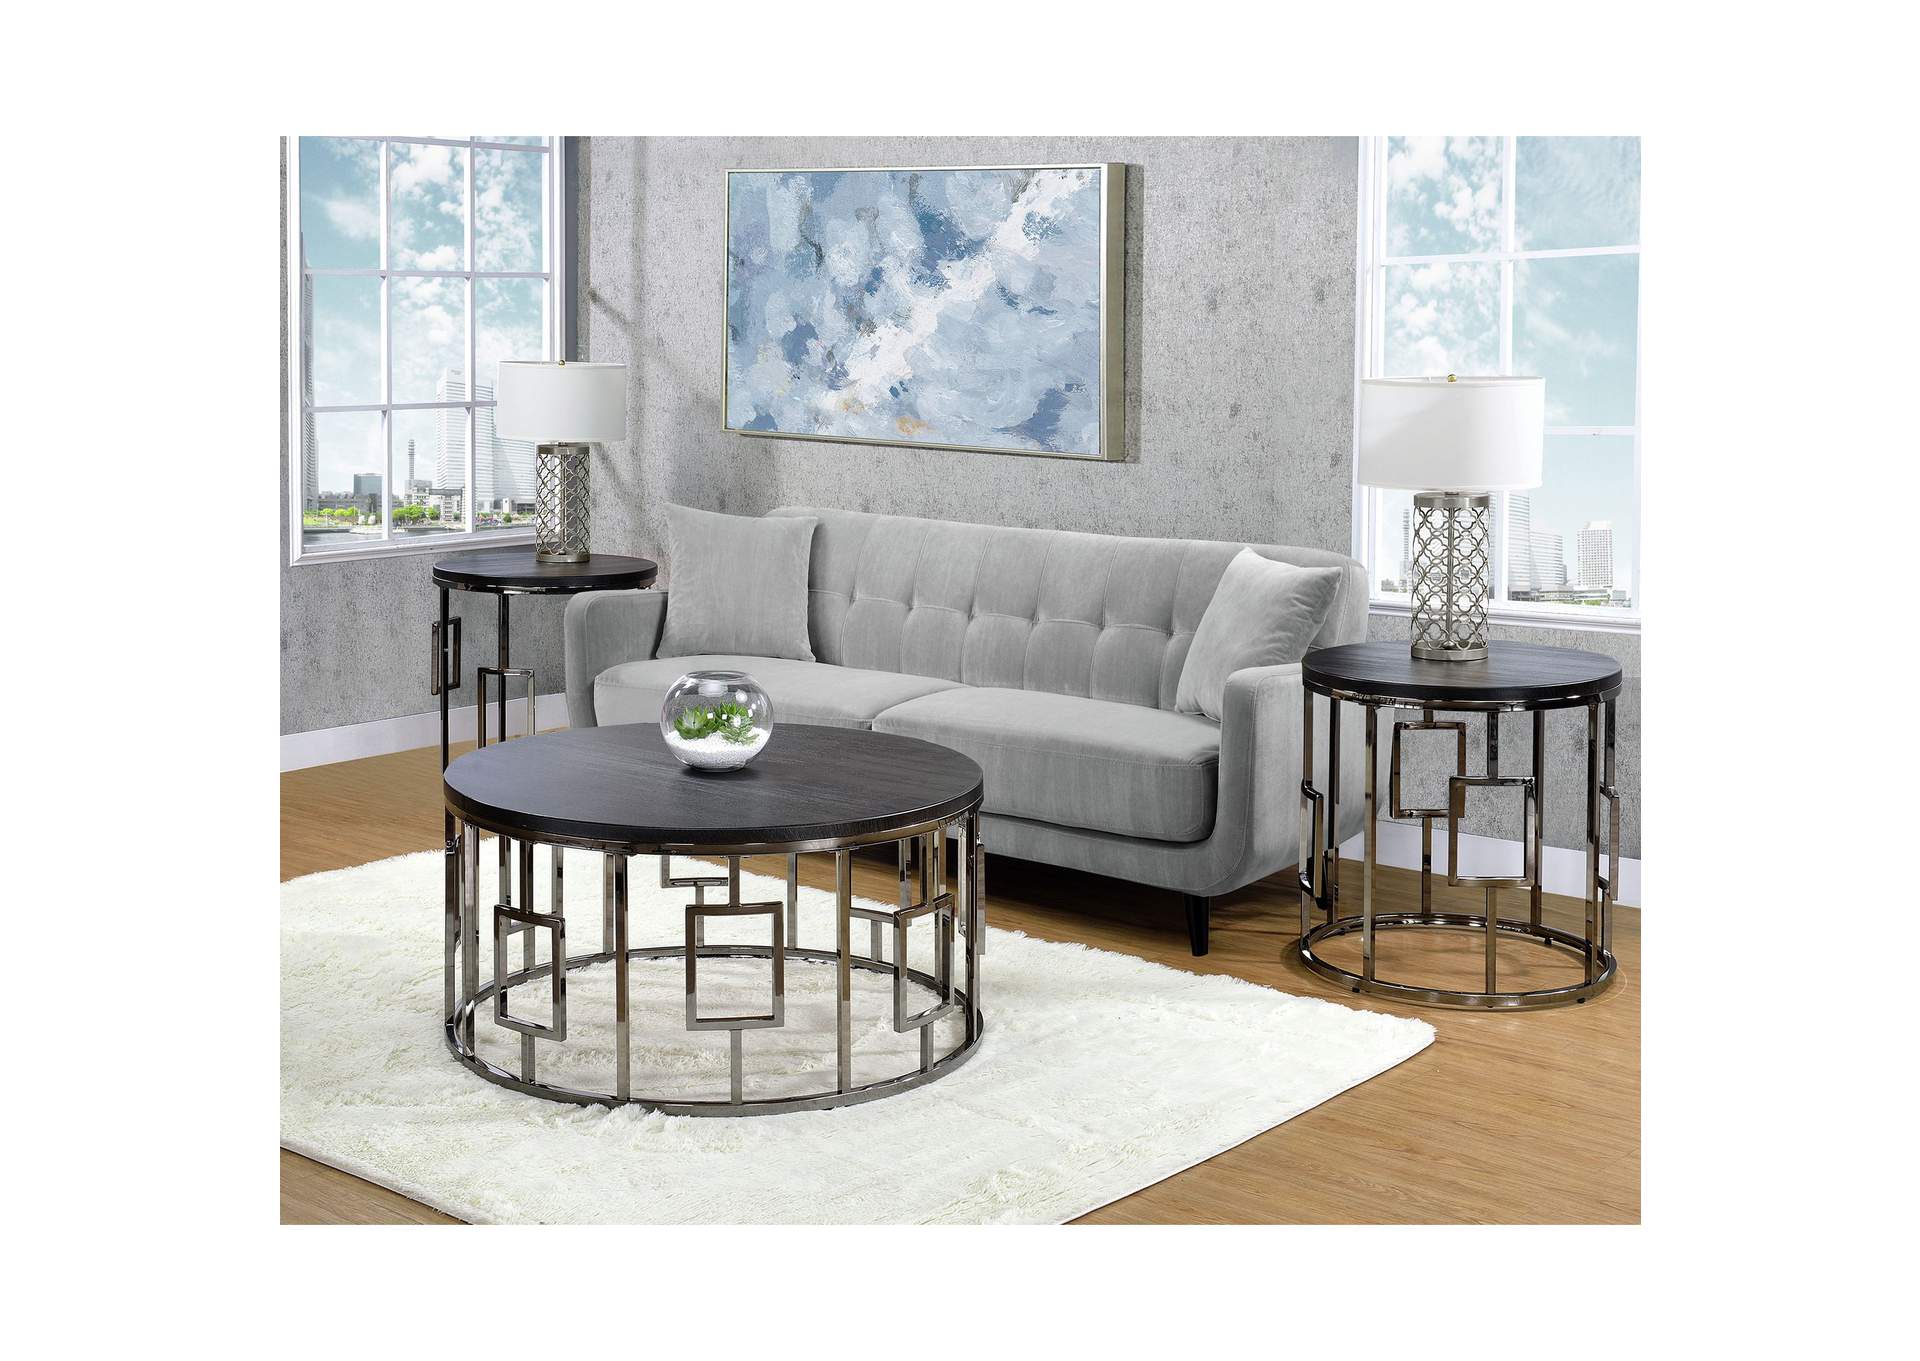 Ester C - 113C - 1114 Coffee Table Upgraded 3A,Elements